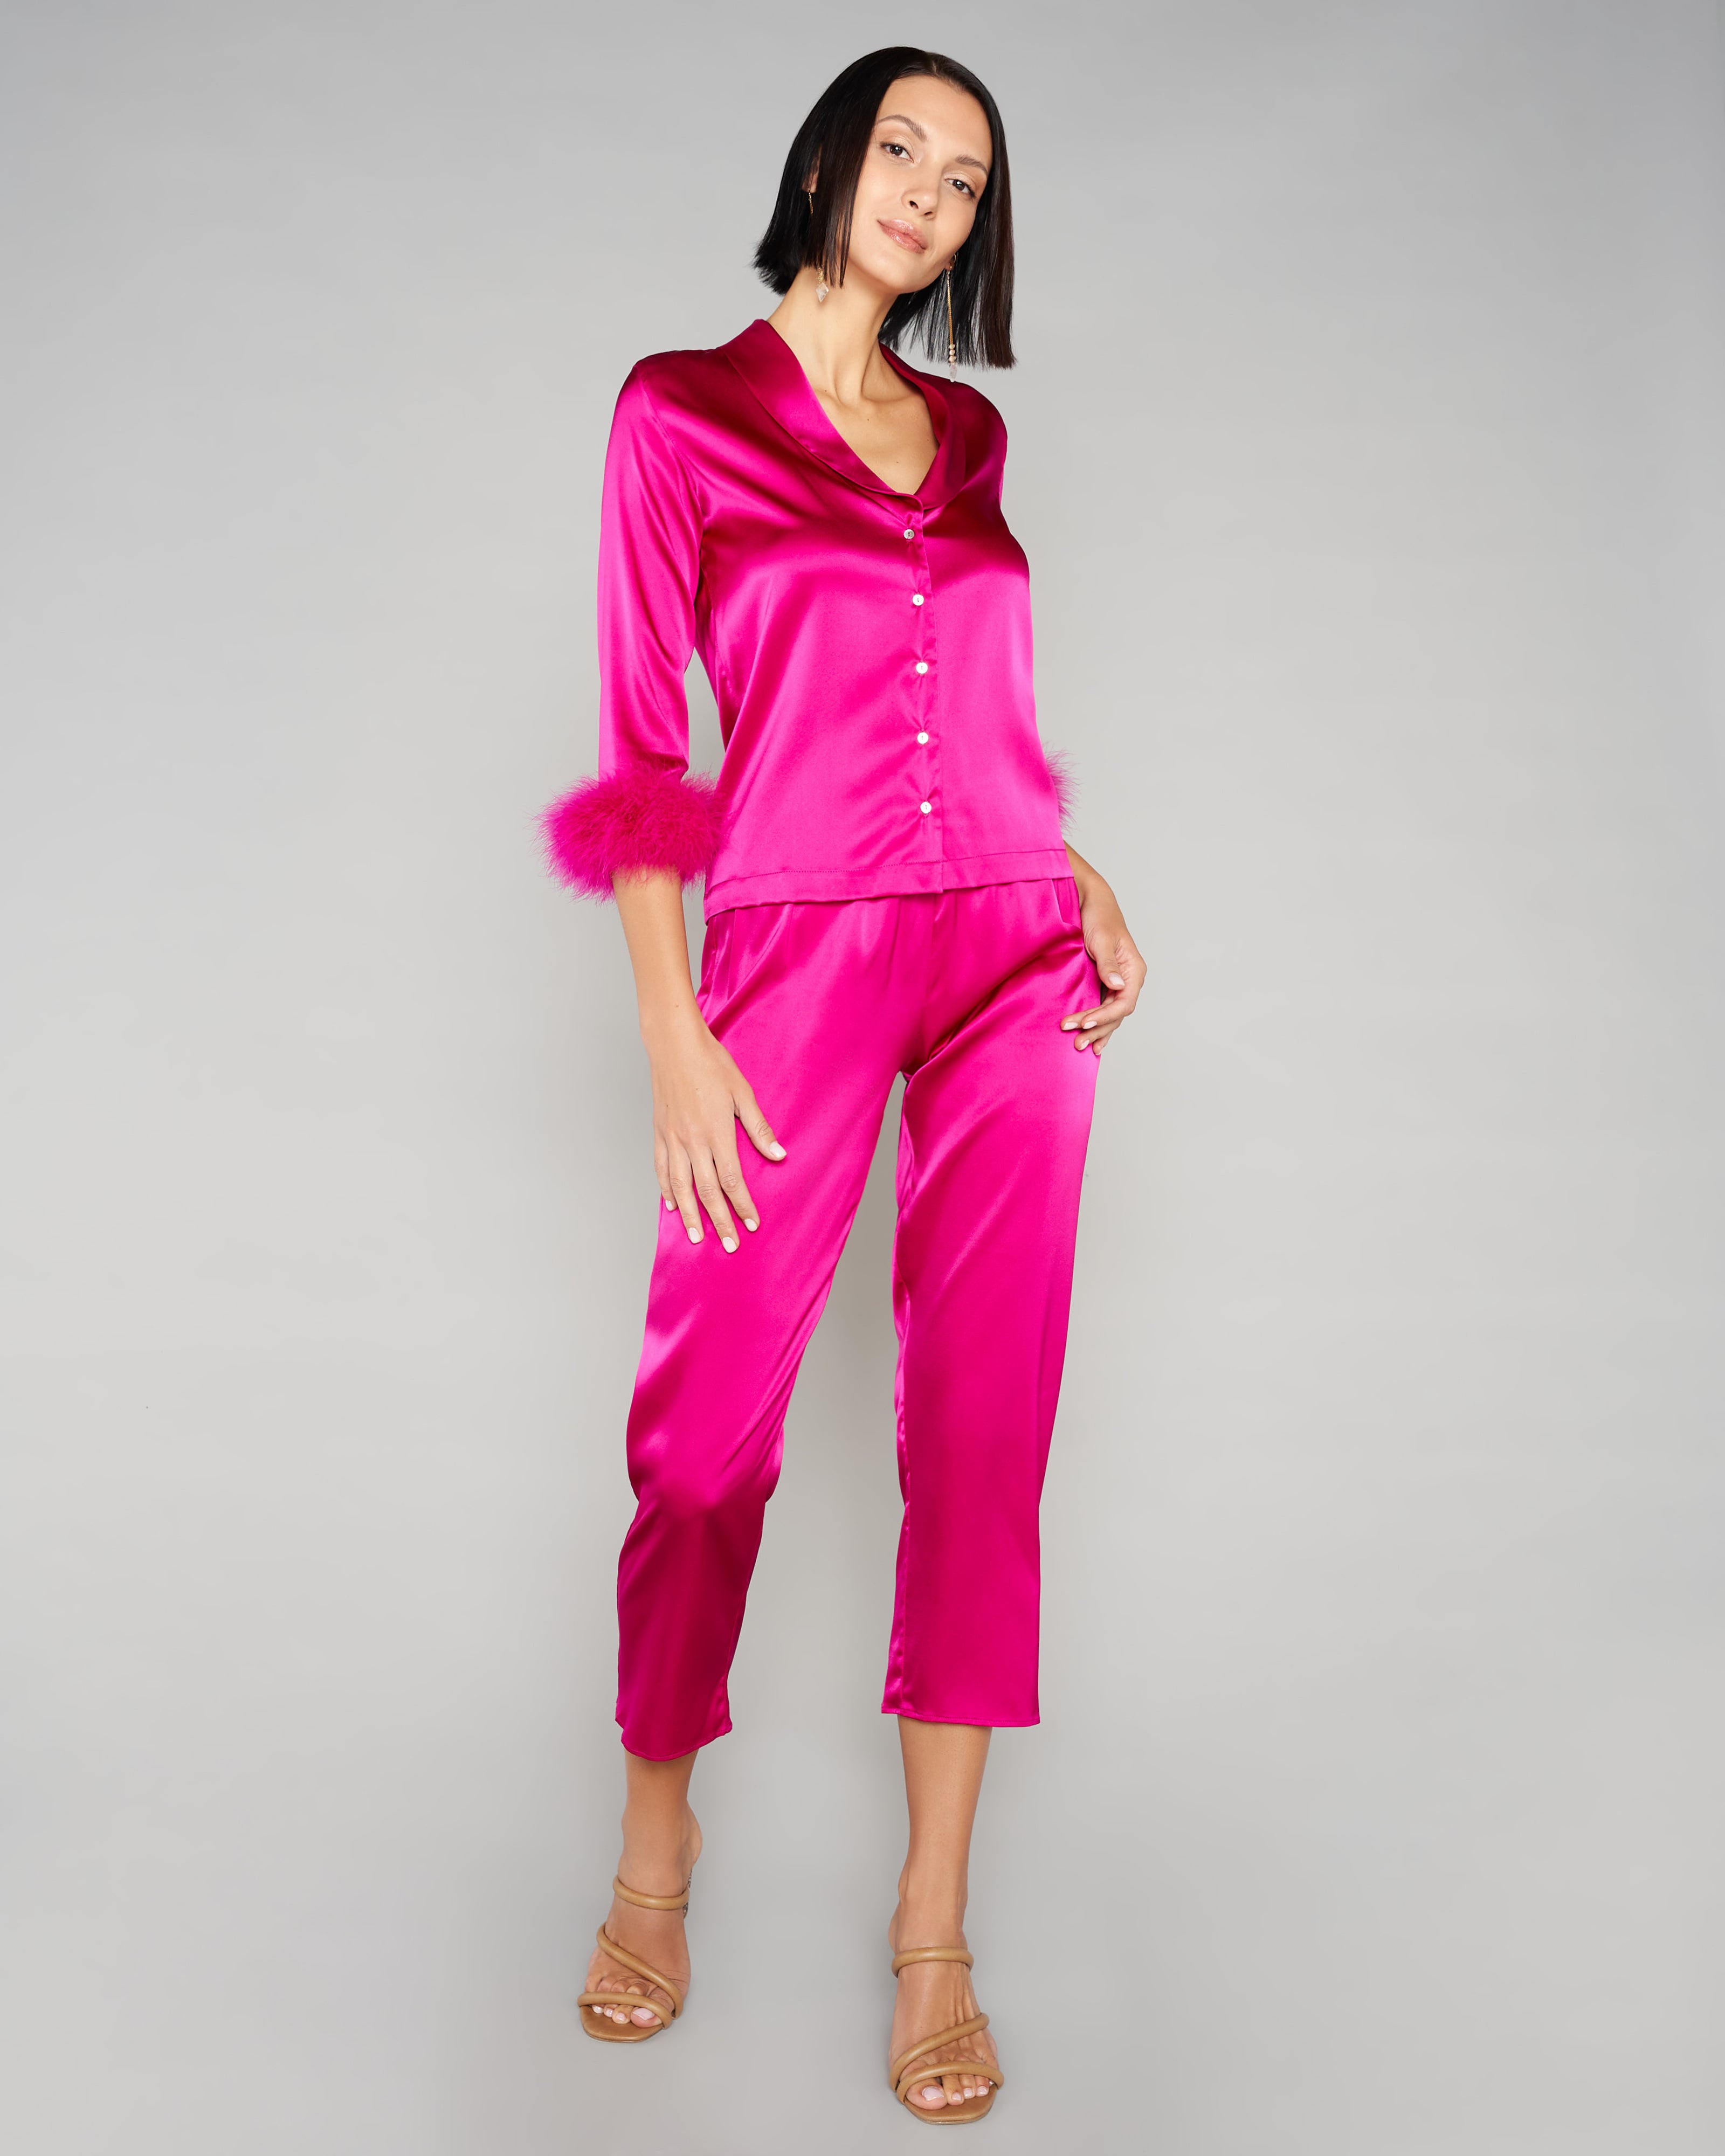 Revamp your bedtime style with our satin pajama set designed with